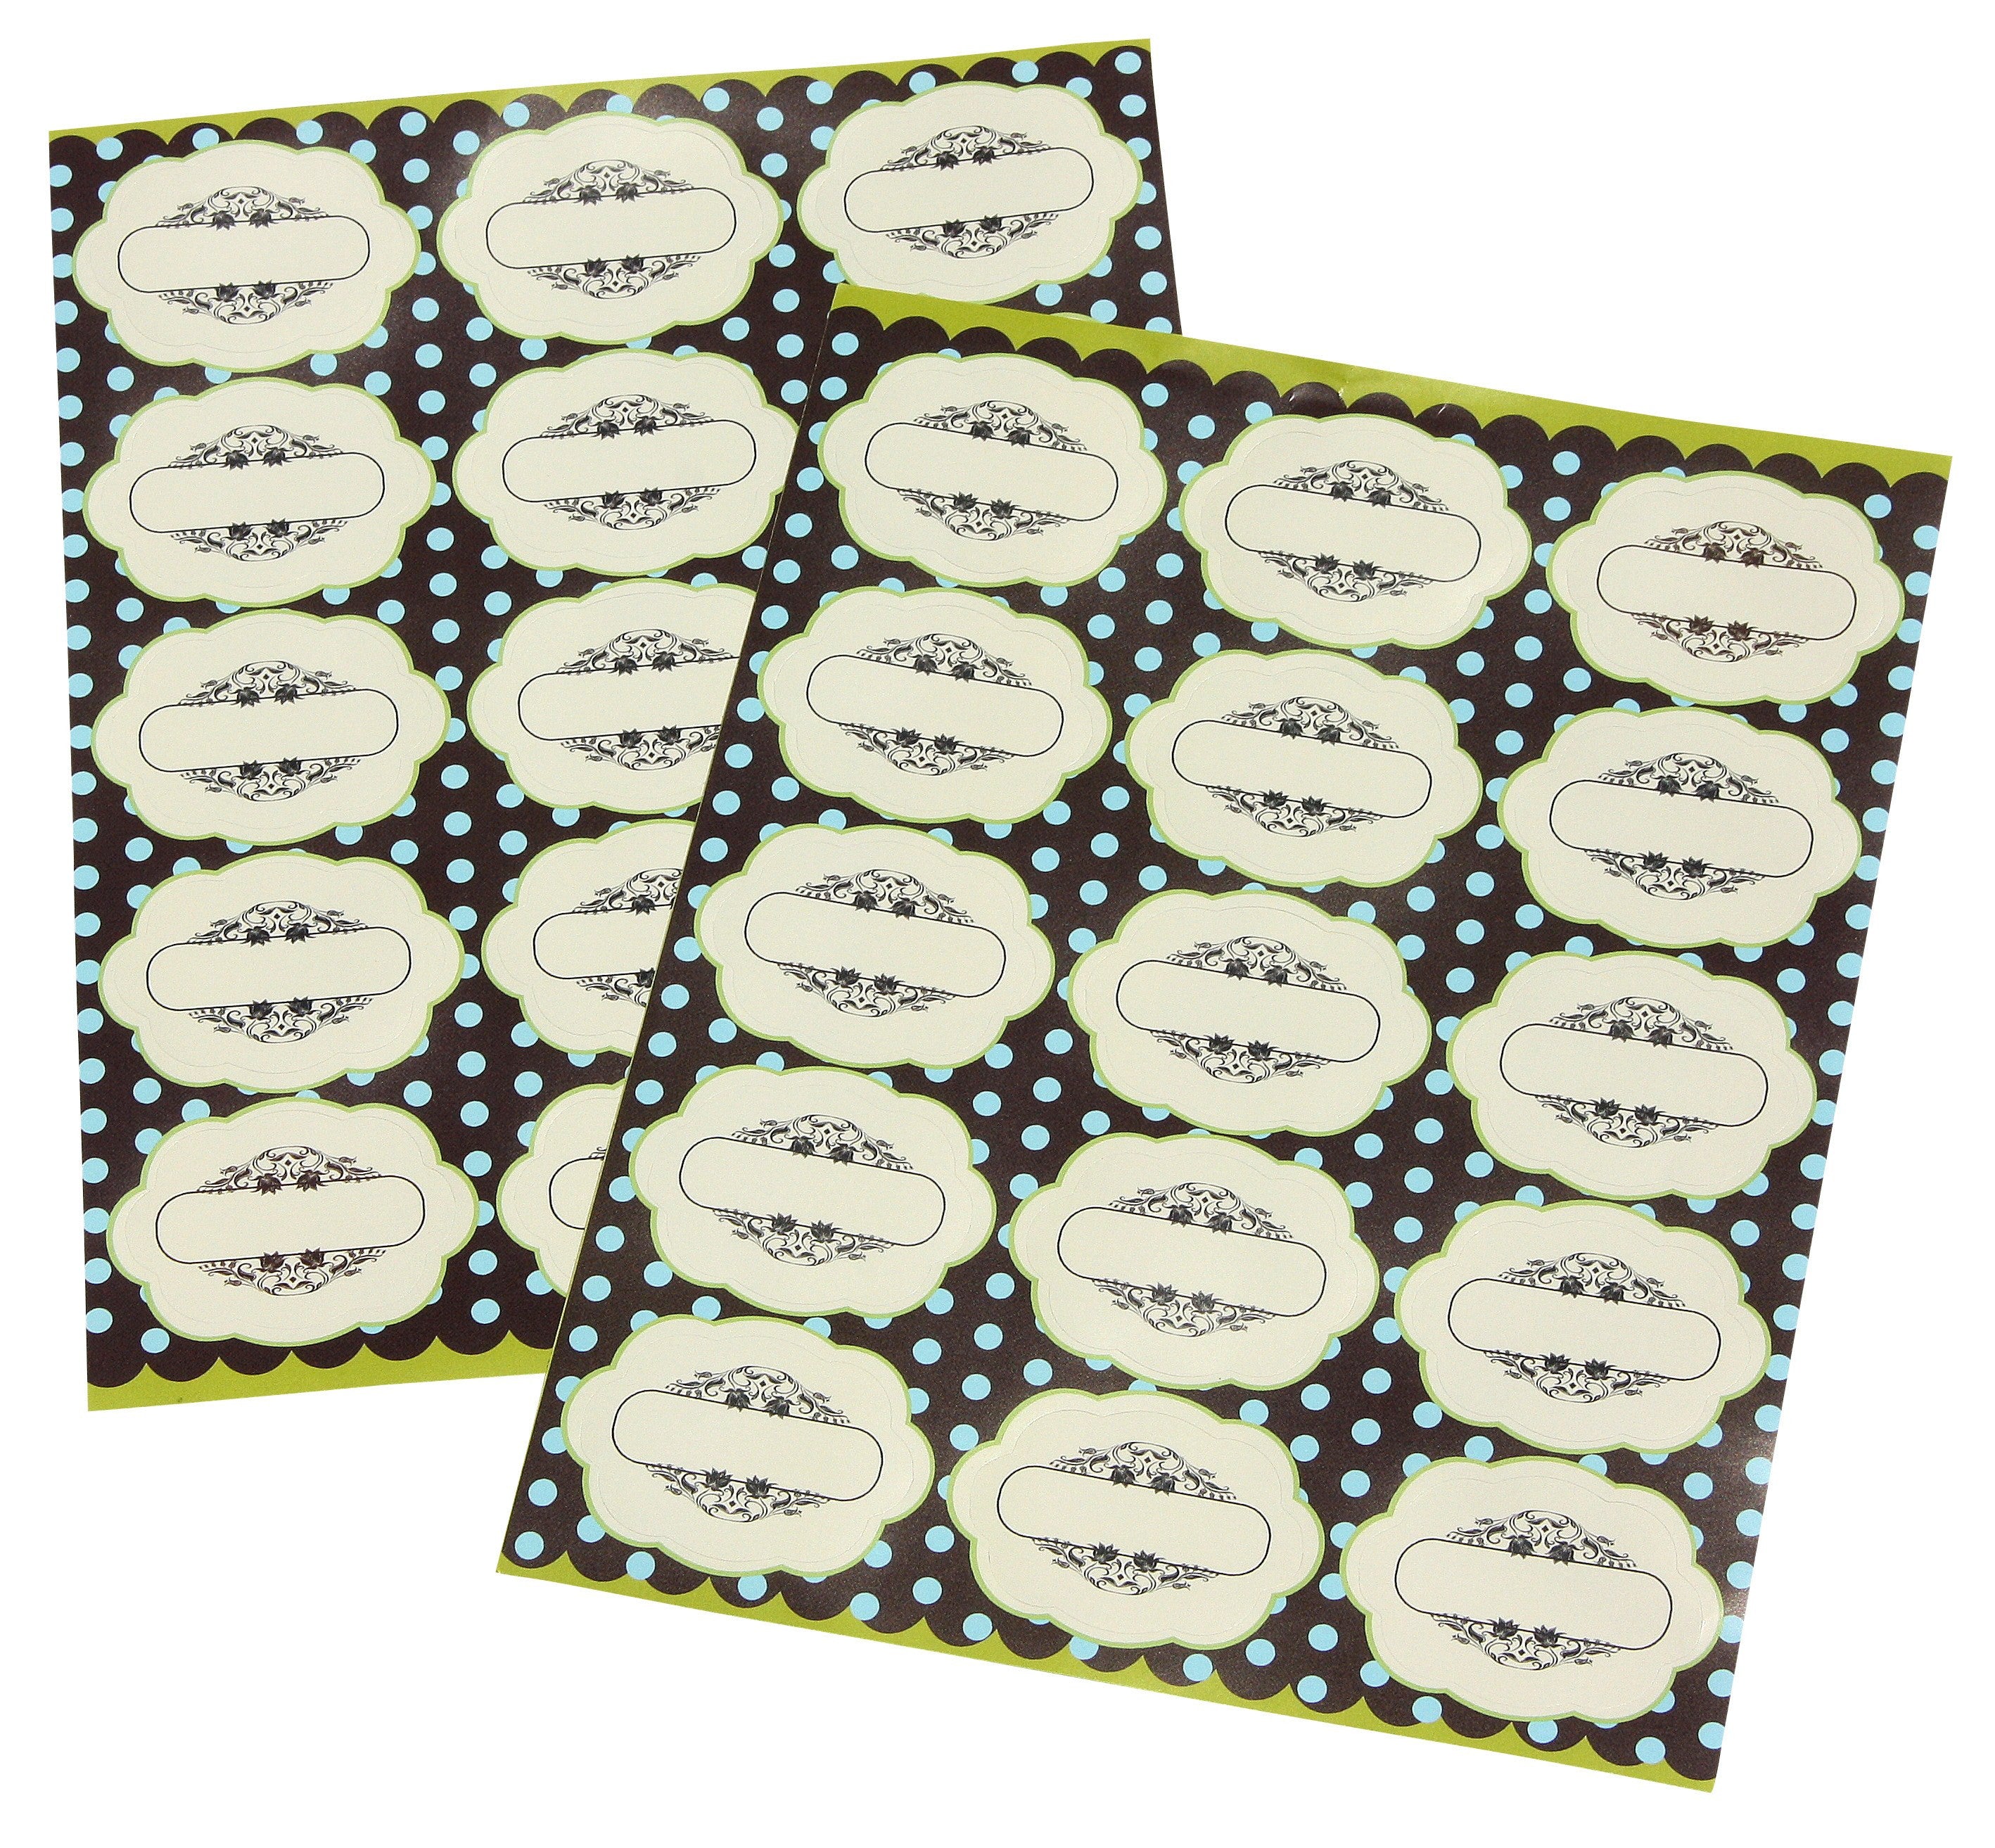 Royal Green Decorative Spice Labels for Spices Jars. Black Letters. Great for Kitchen or Home Organization - 30 Printed Spice Stickers + 30 Blank